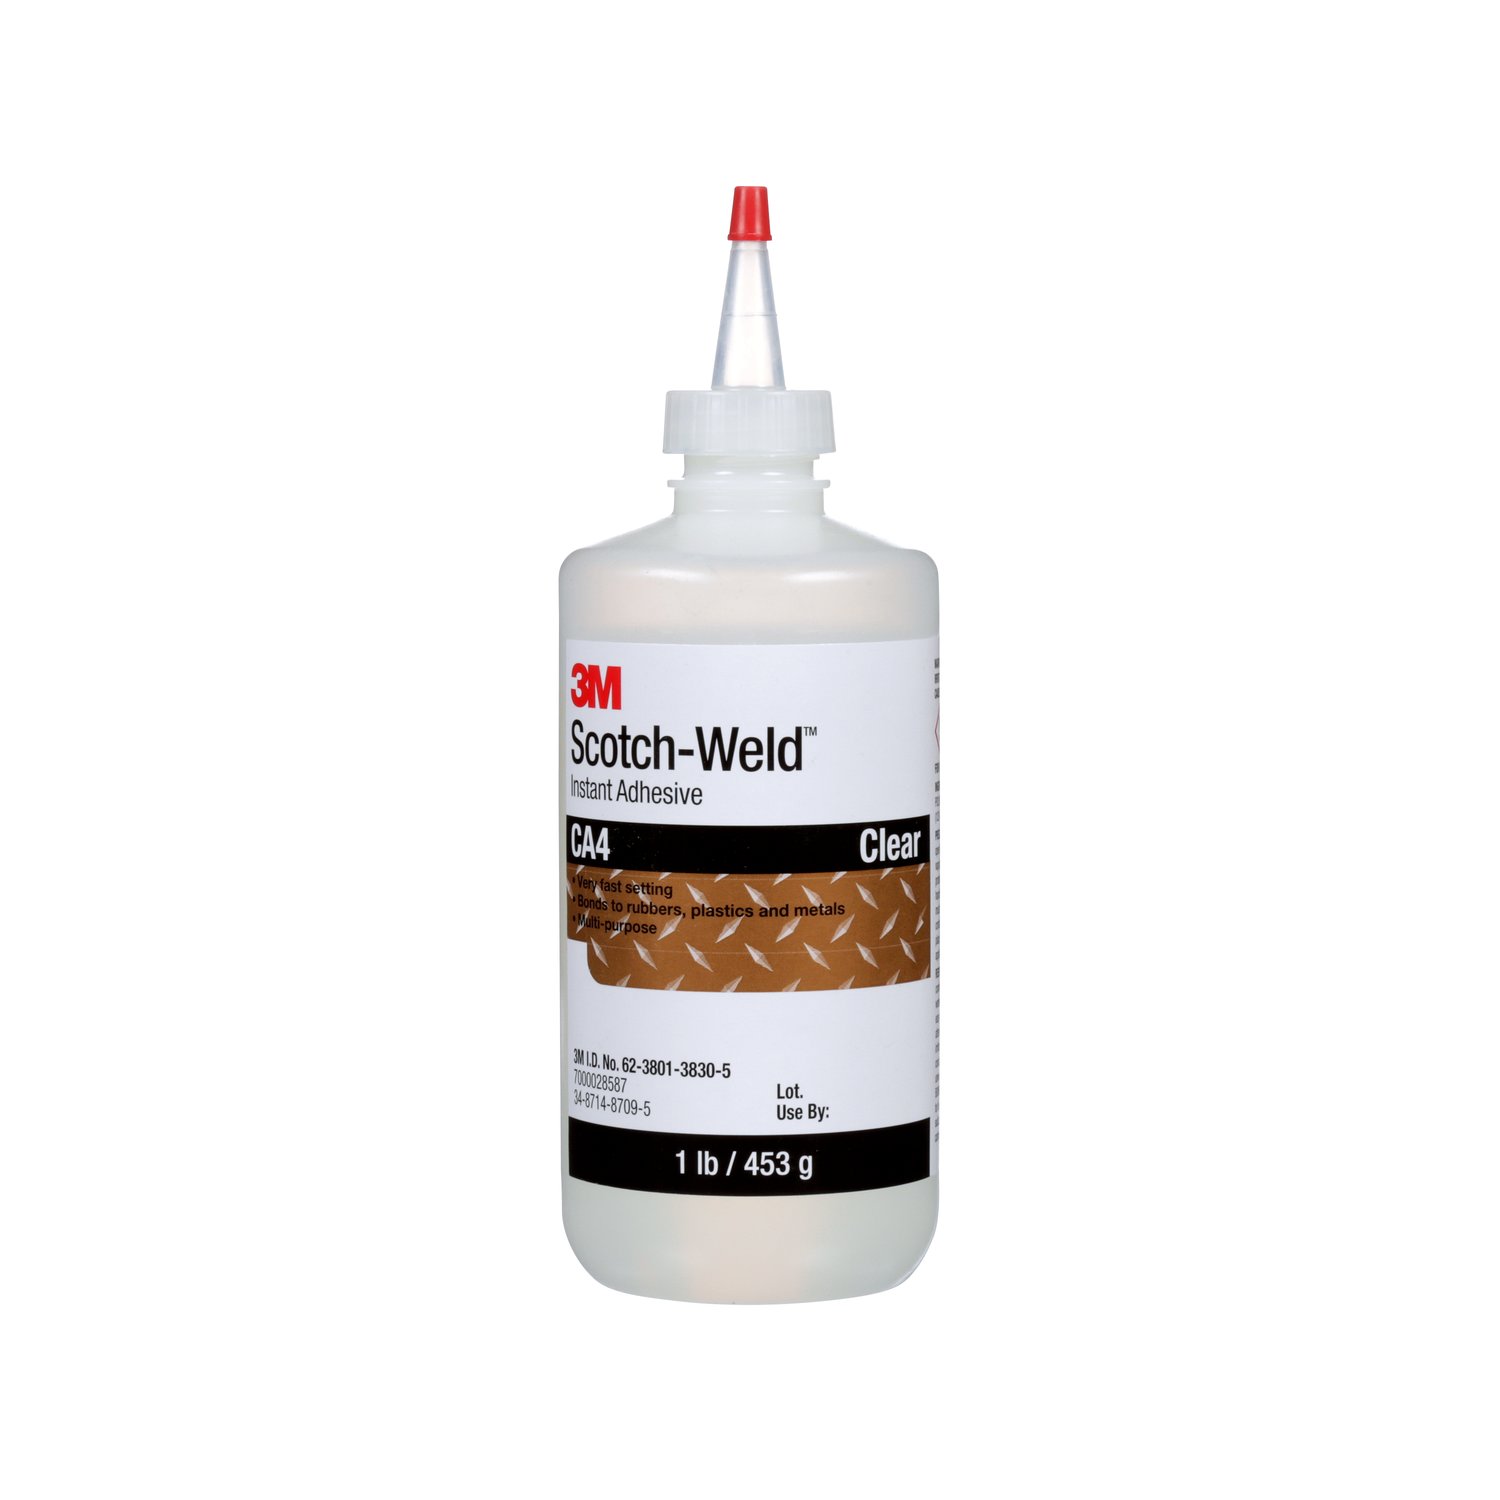 7000028587 - 3M Scotch-Weld Instant Adhesive CA4, Clear, 1 Pound, 1 Bottle/Case